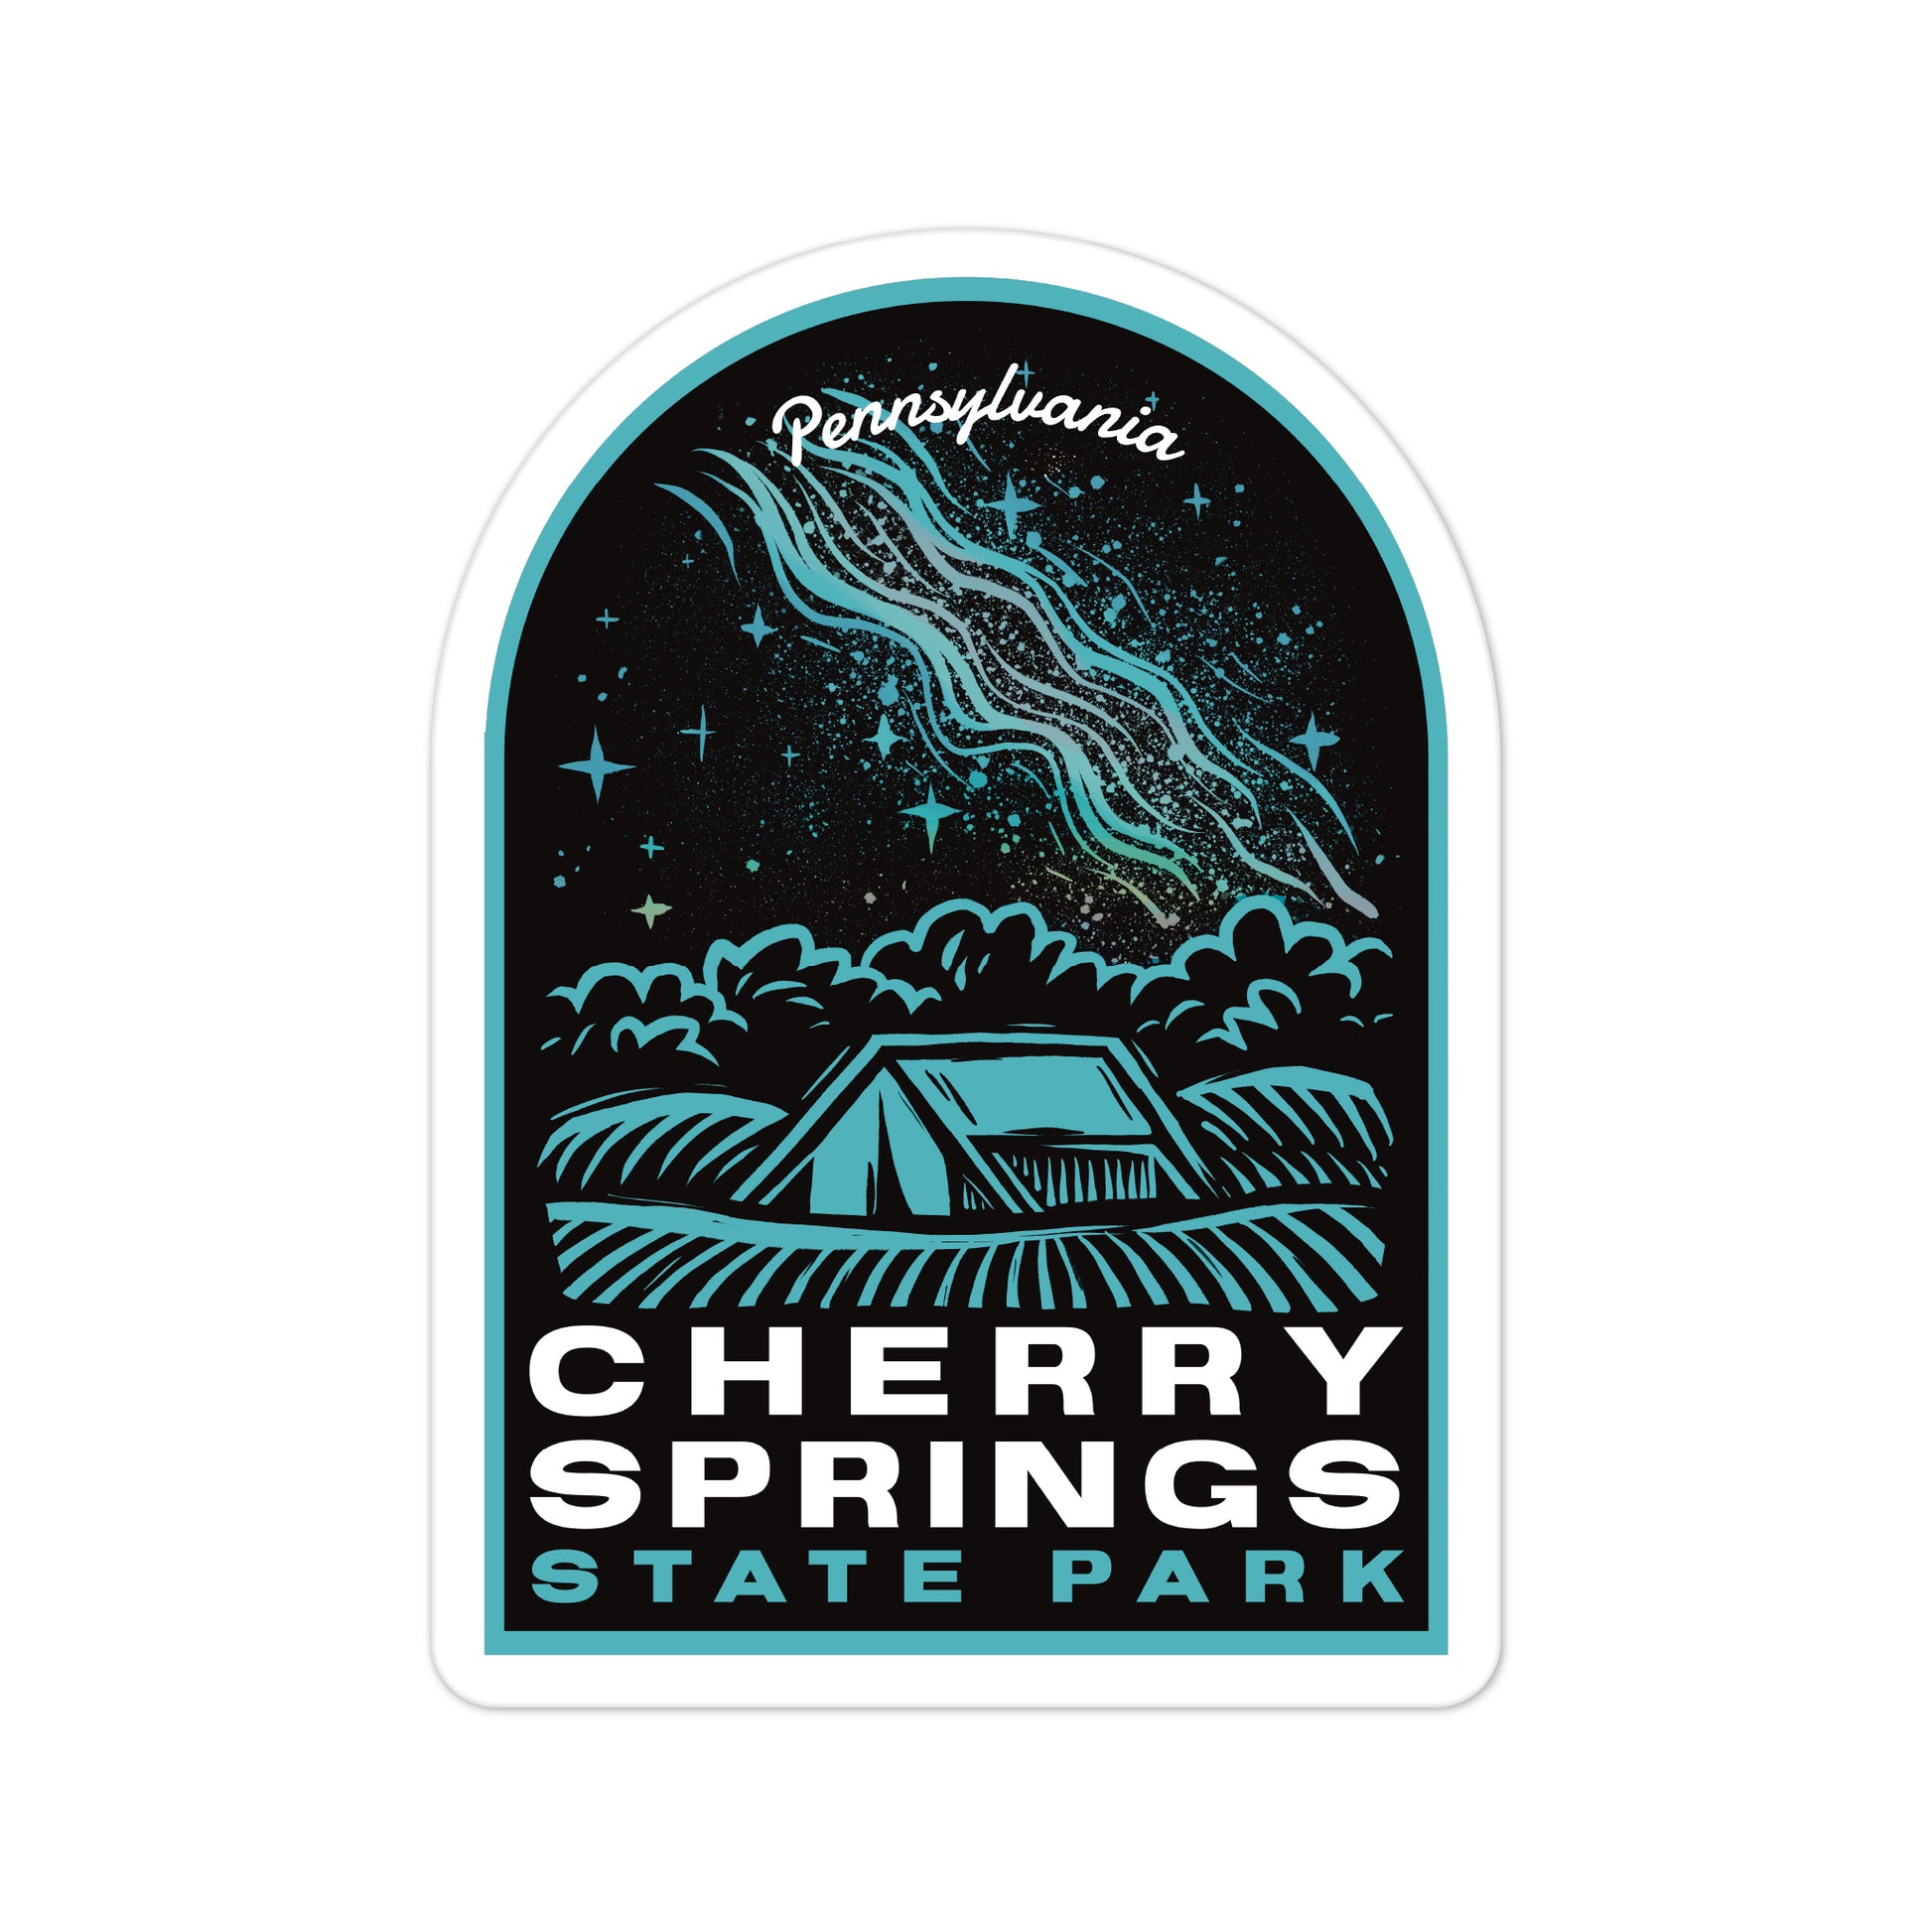 A sticker of Cherry Springs State Park